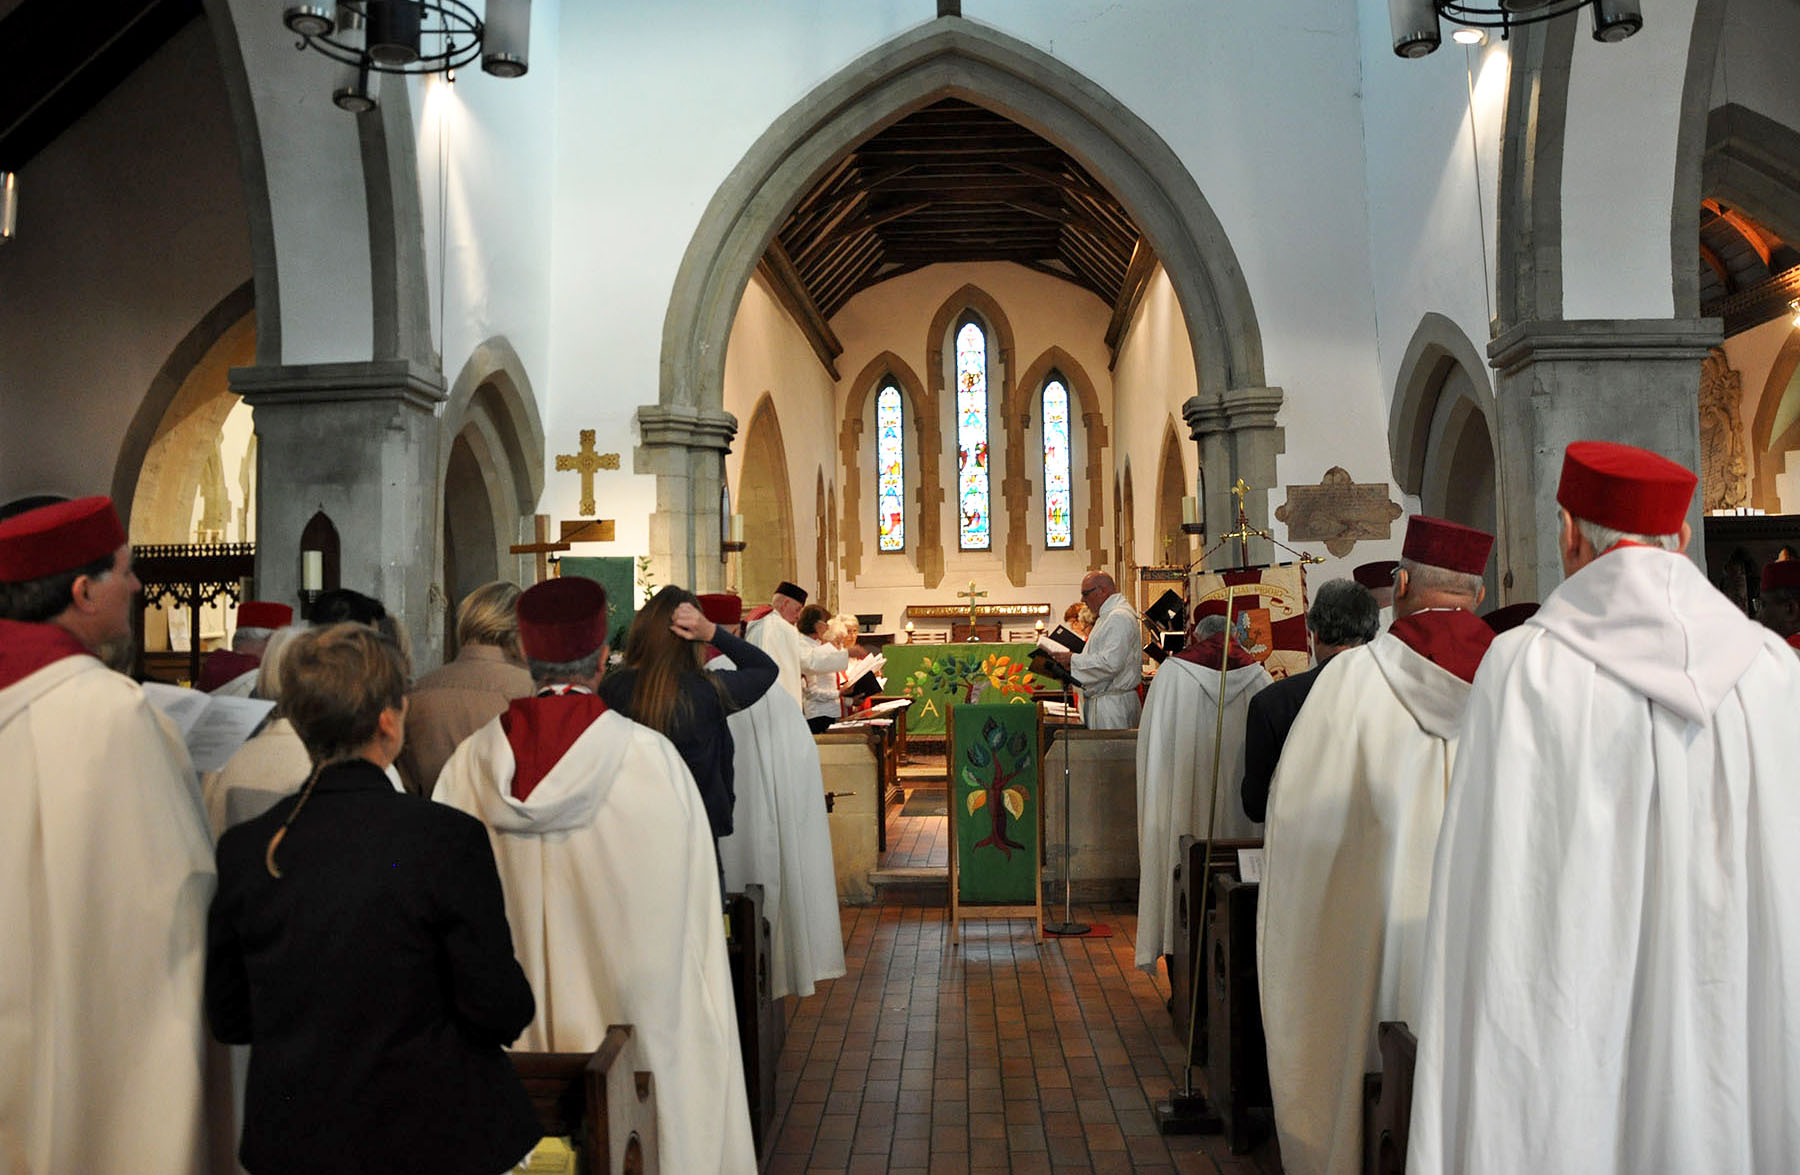 Provincial Priory of Surrey Service of Rededication and Thanksgiving